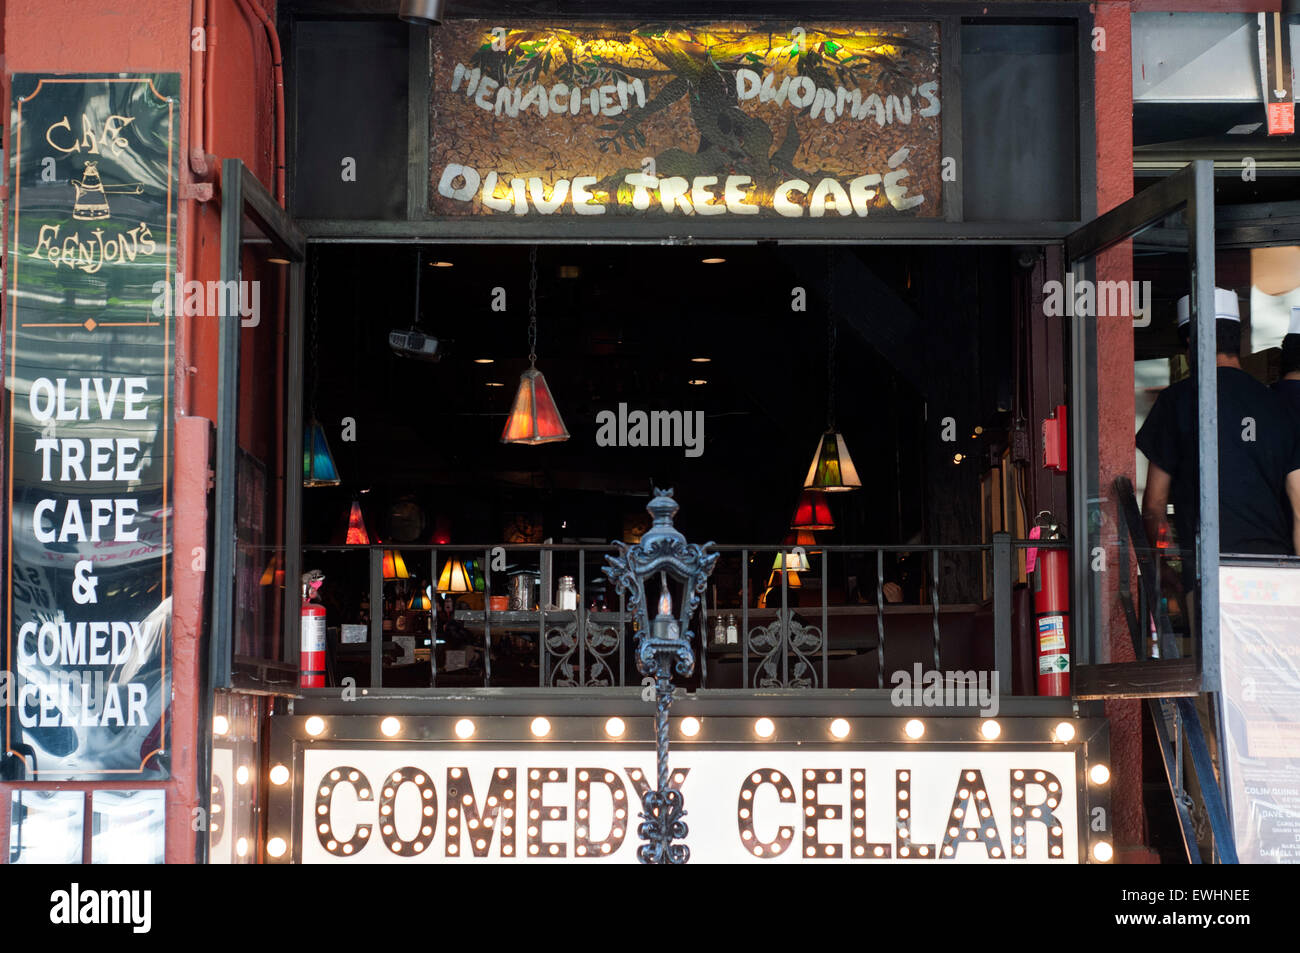 Olive Tree Cafe and comedy Cellar. Greenwich Village. Manhattan. New York. NYC, USA. Stock Photo